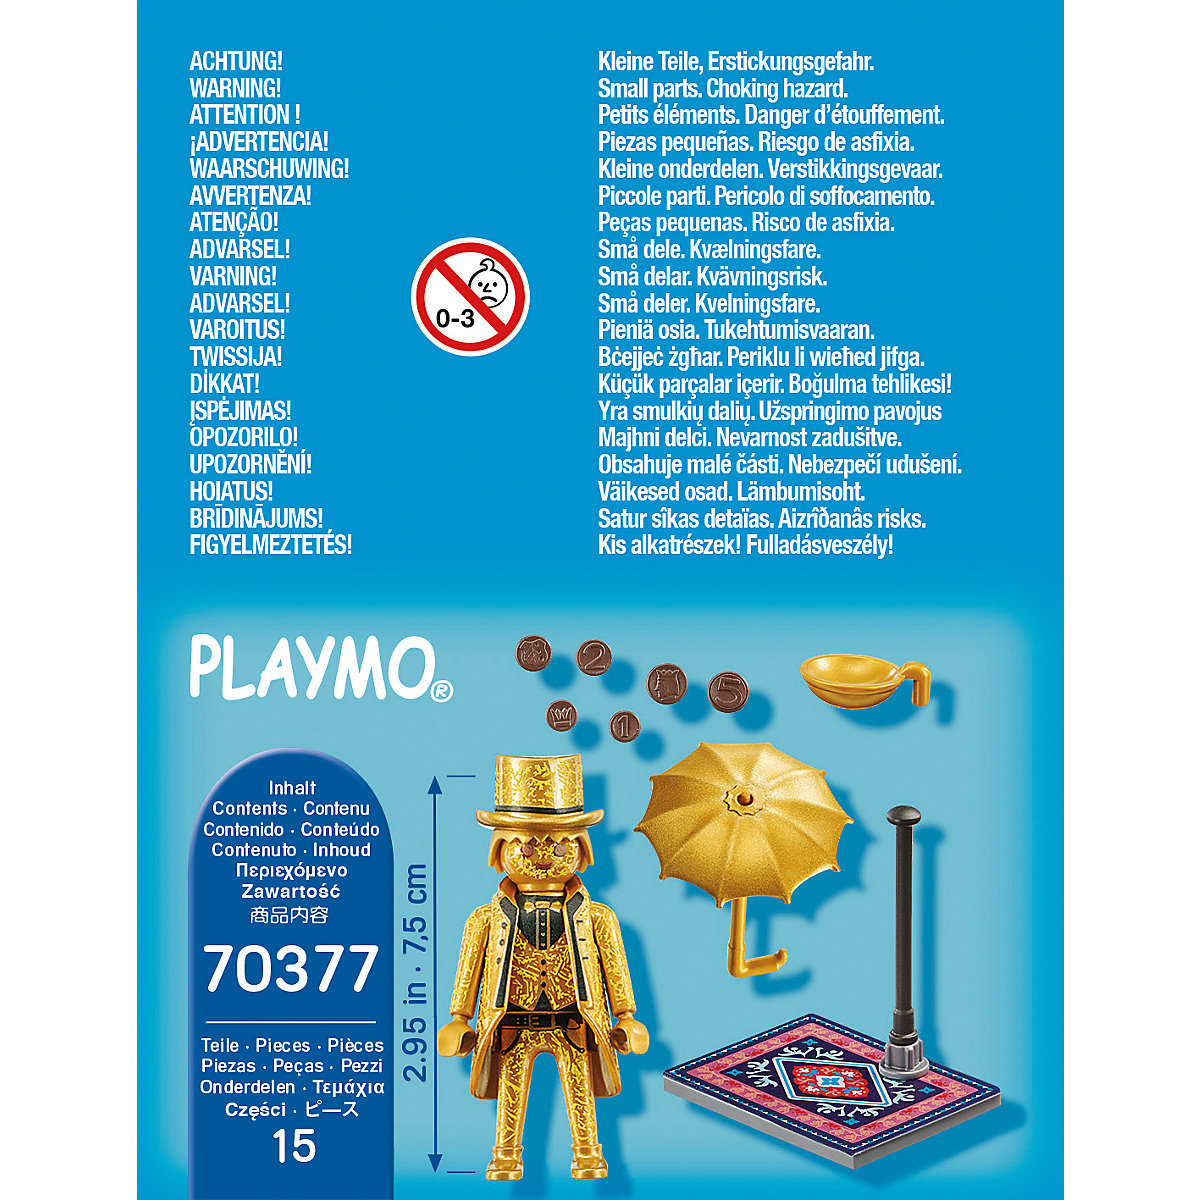  prompt decision! new goods PLAYMOBIL 70377 special plus Street artist Play Mobil 